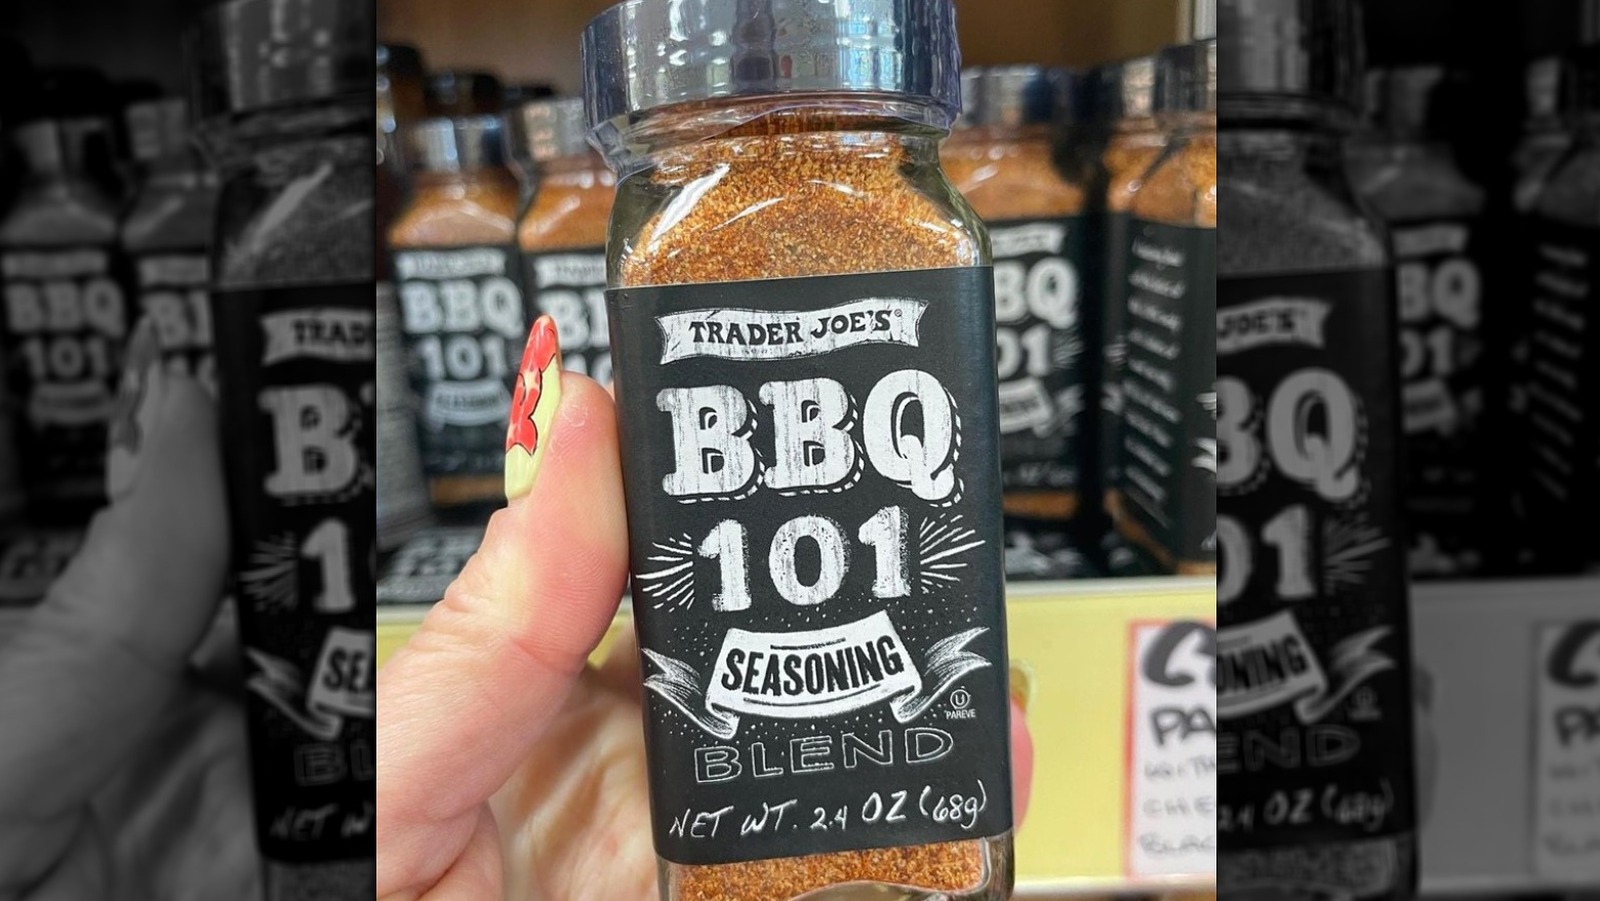 https://www.mashed.com/img/gallery/trader-joes-fans-are-so-excited-for-its-new-bbq-seasoning-blend/l-intro-1628097759.jpg